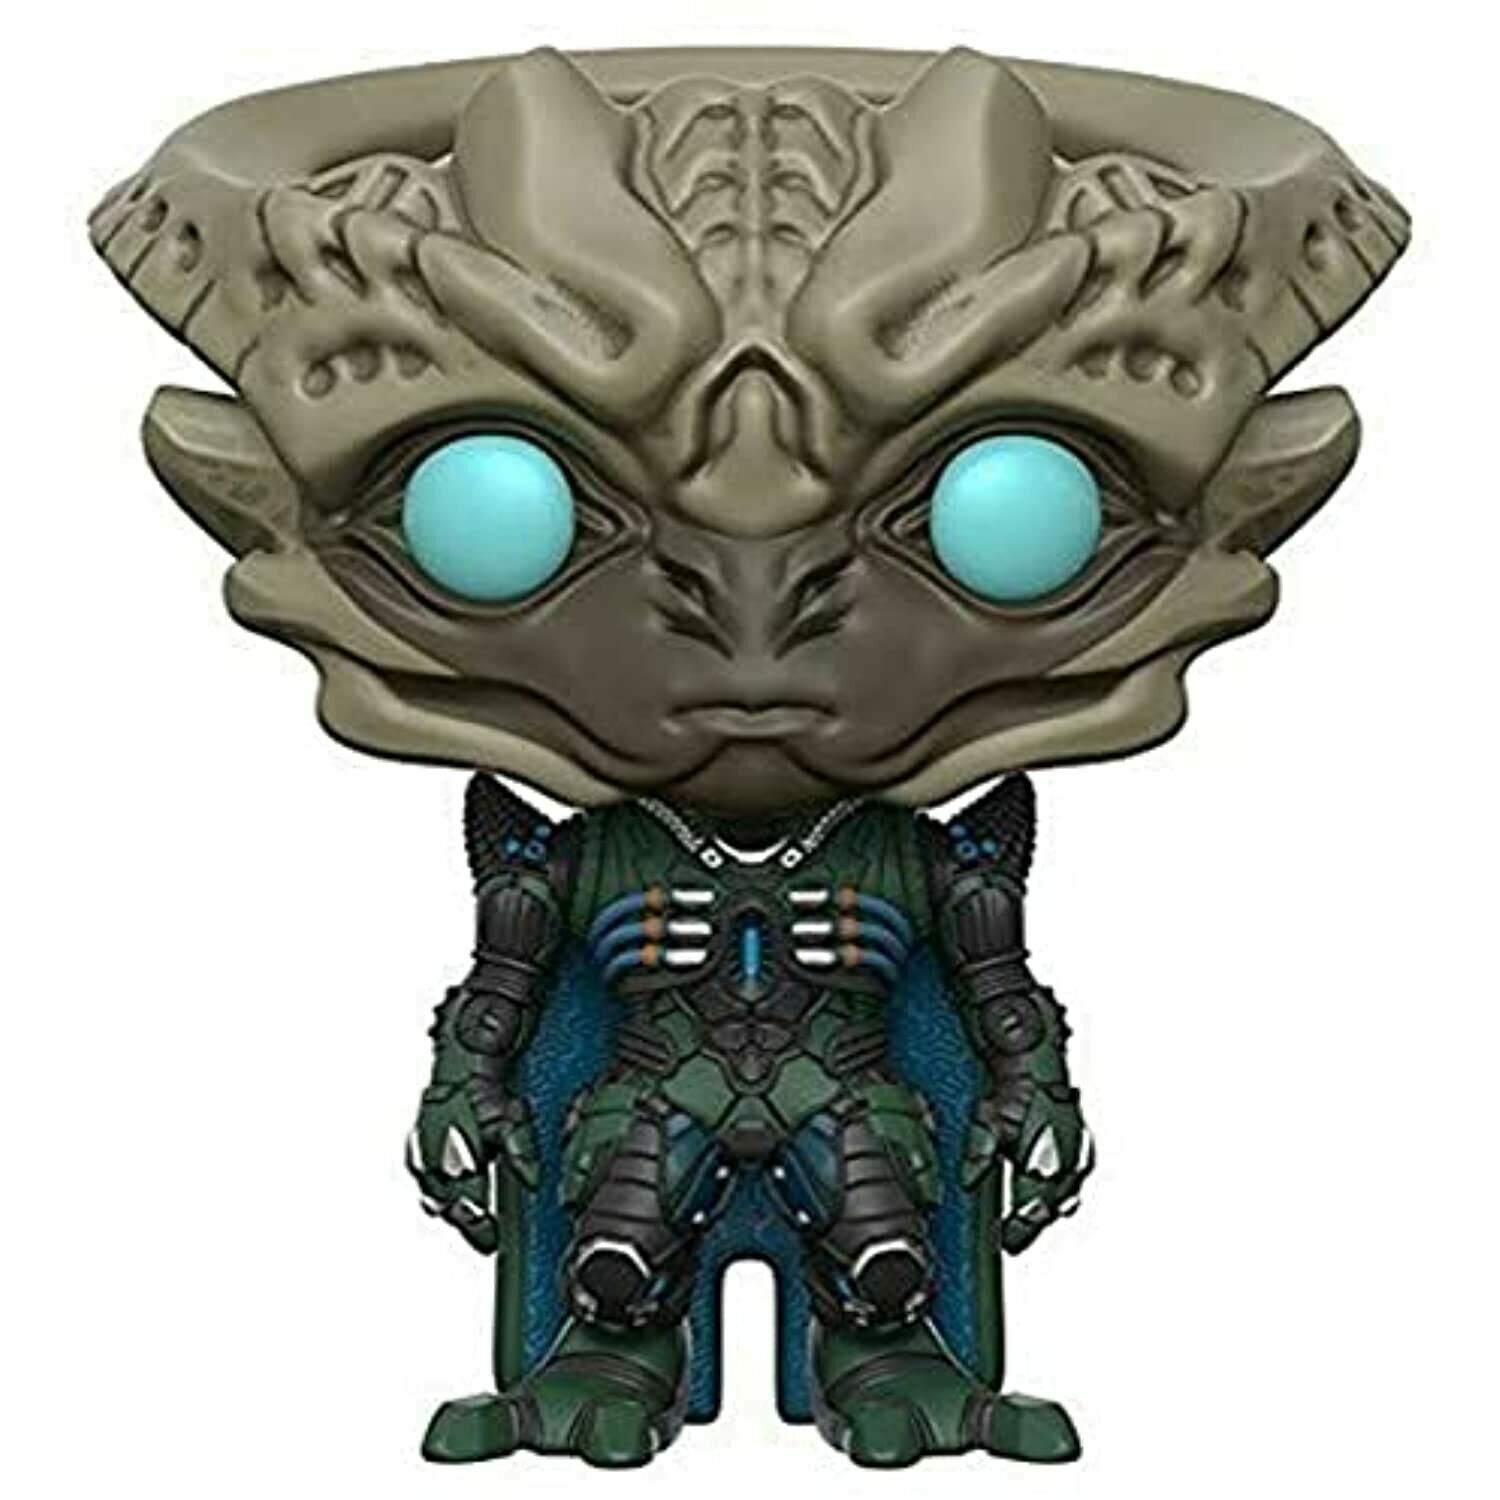 Funko Pop Games: Mass Effect Andromeda - The Archon Toy Figure